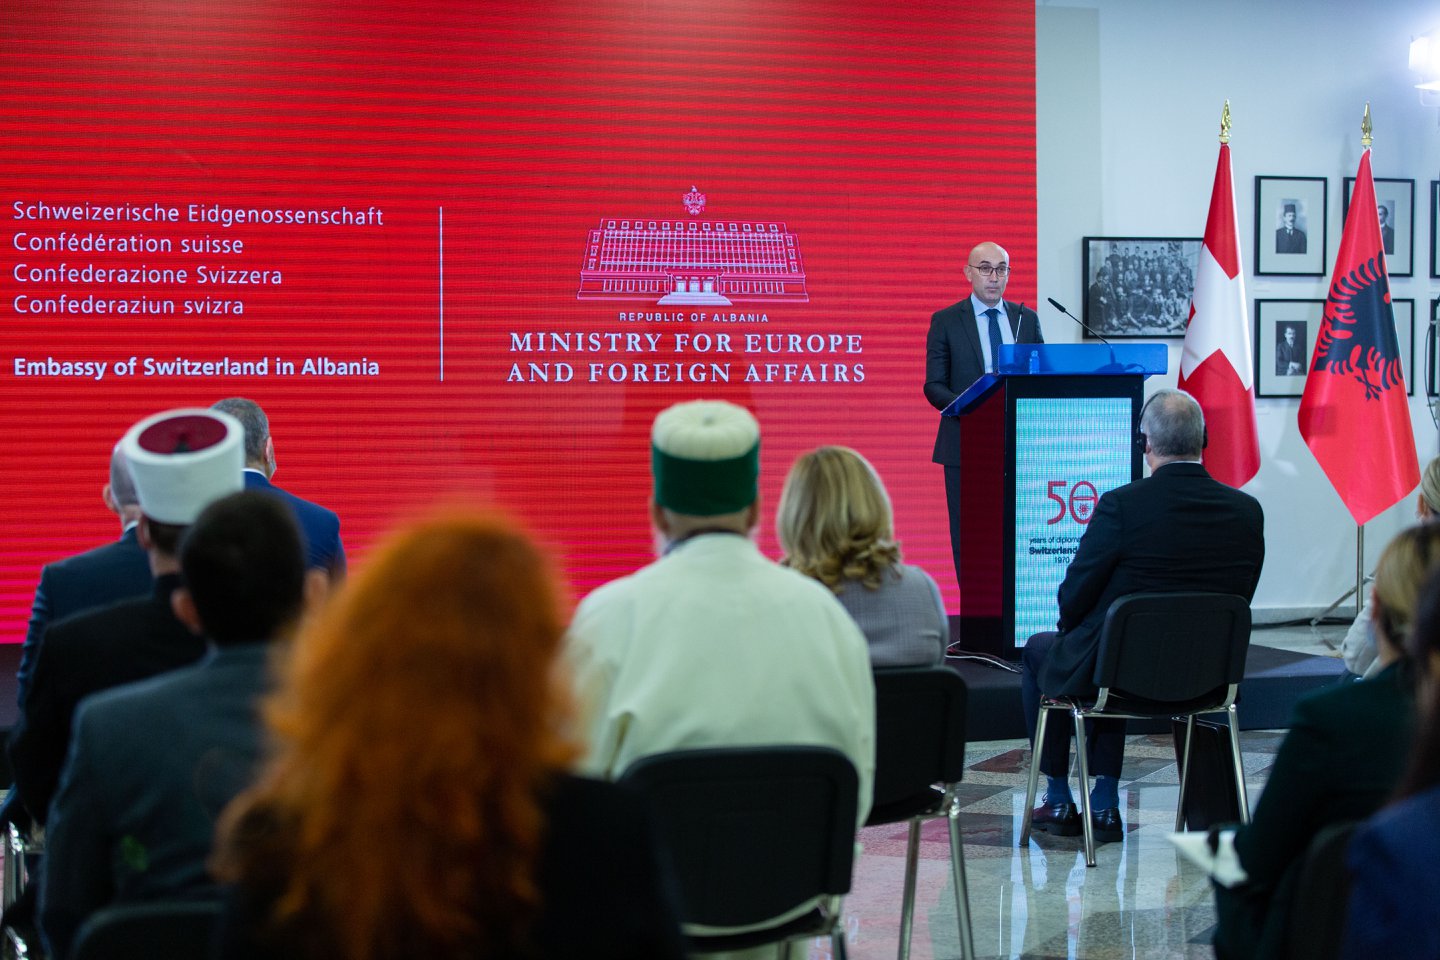 Key moments from the event on celebrating 50 years of Swiss-Albanian official relations, organised by the Embassy of Switzerand and Albania's Ministry for Europe and Foreign Affairs on 29.09.2020. 